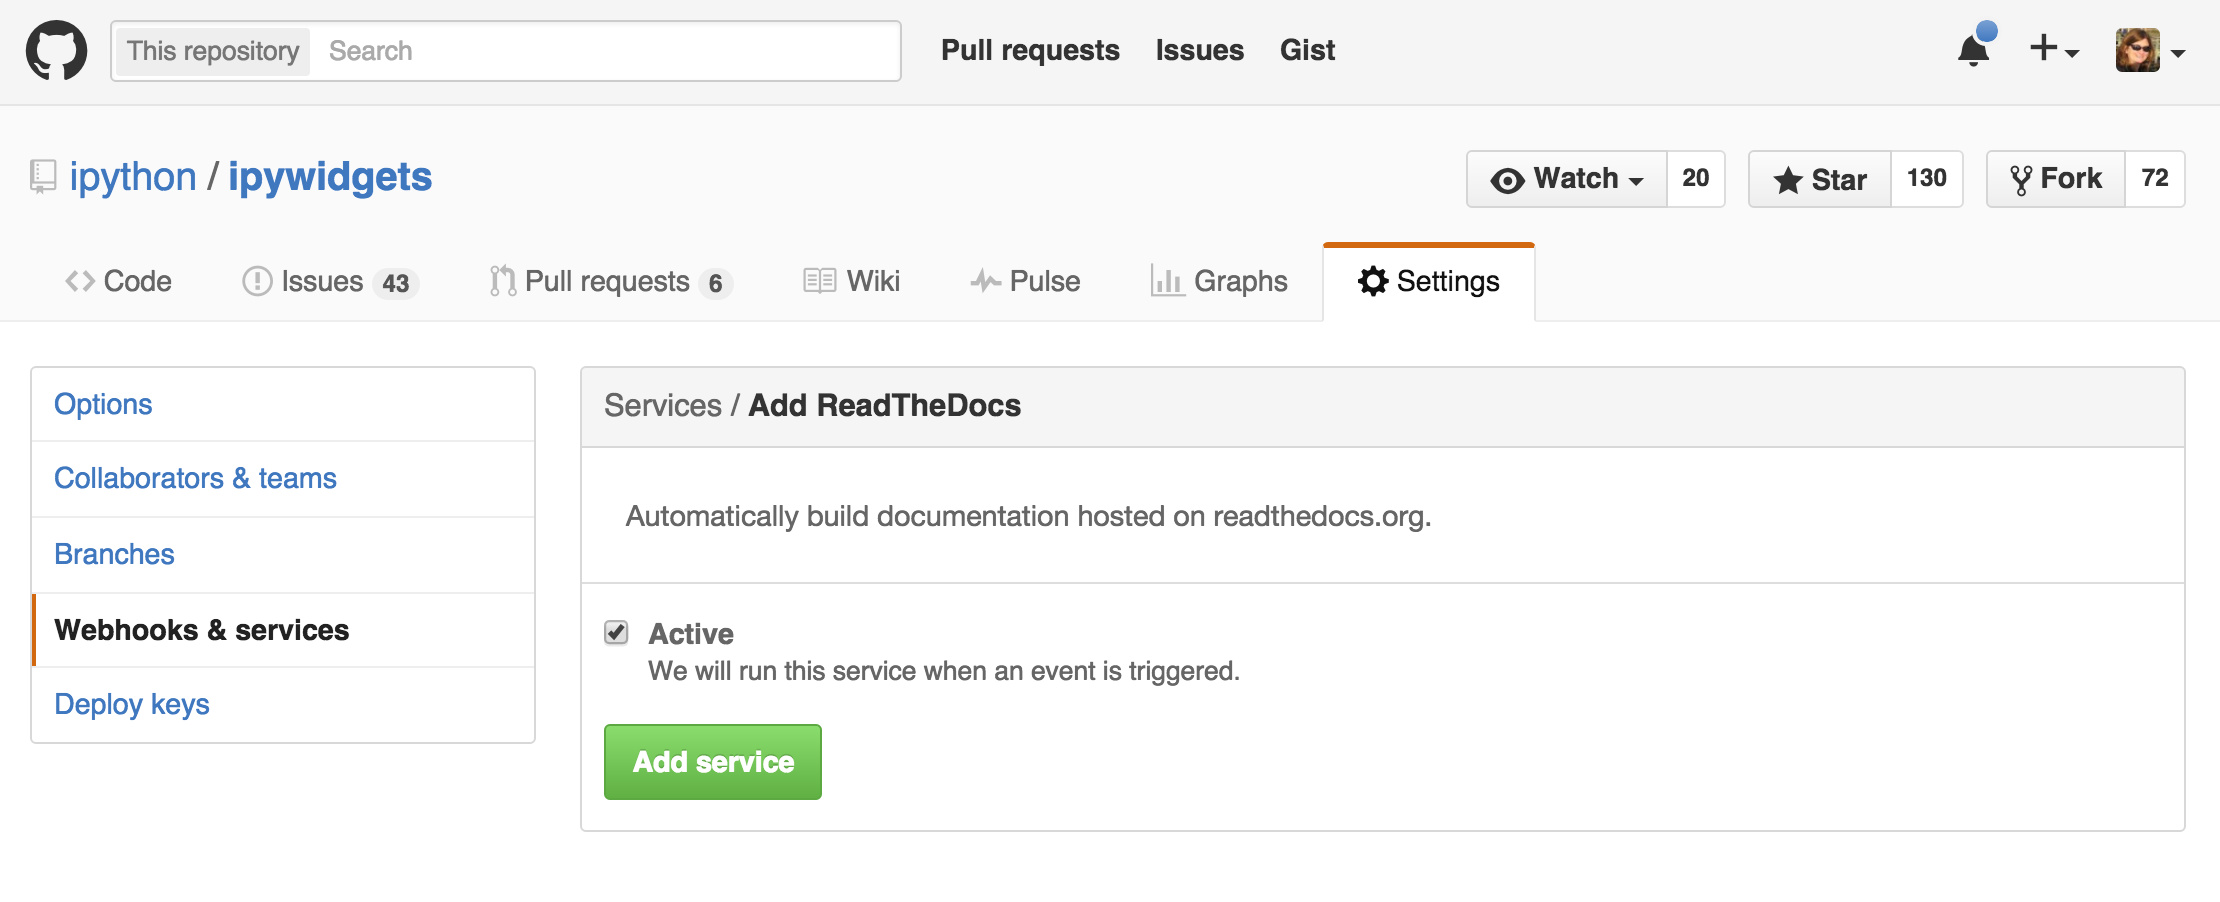 In GitHub, the "Settings" tab of the ipywidgets repository shows that the "ReadTheDocs" service was successfully added to the project. A checkbox with the label "Active" indicates that the service is currently running.